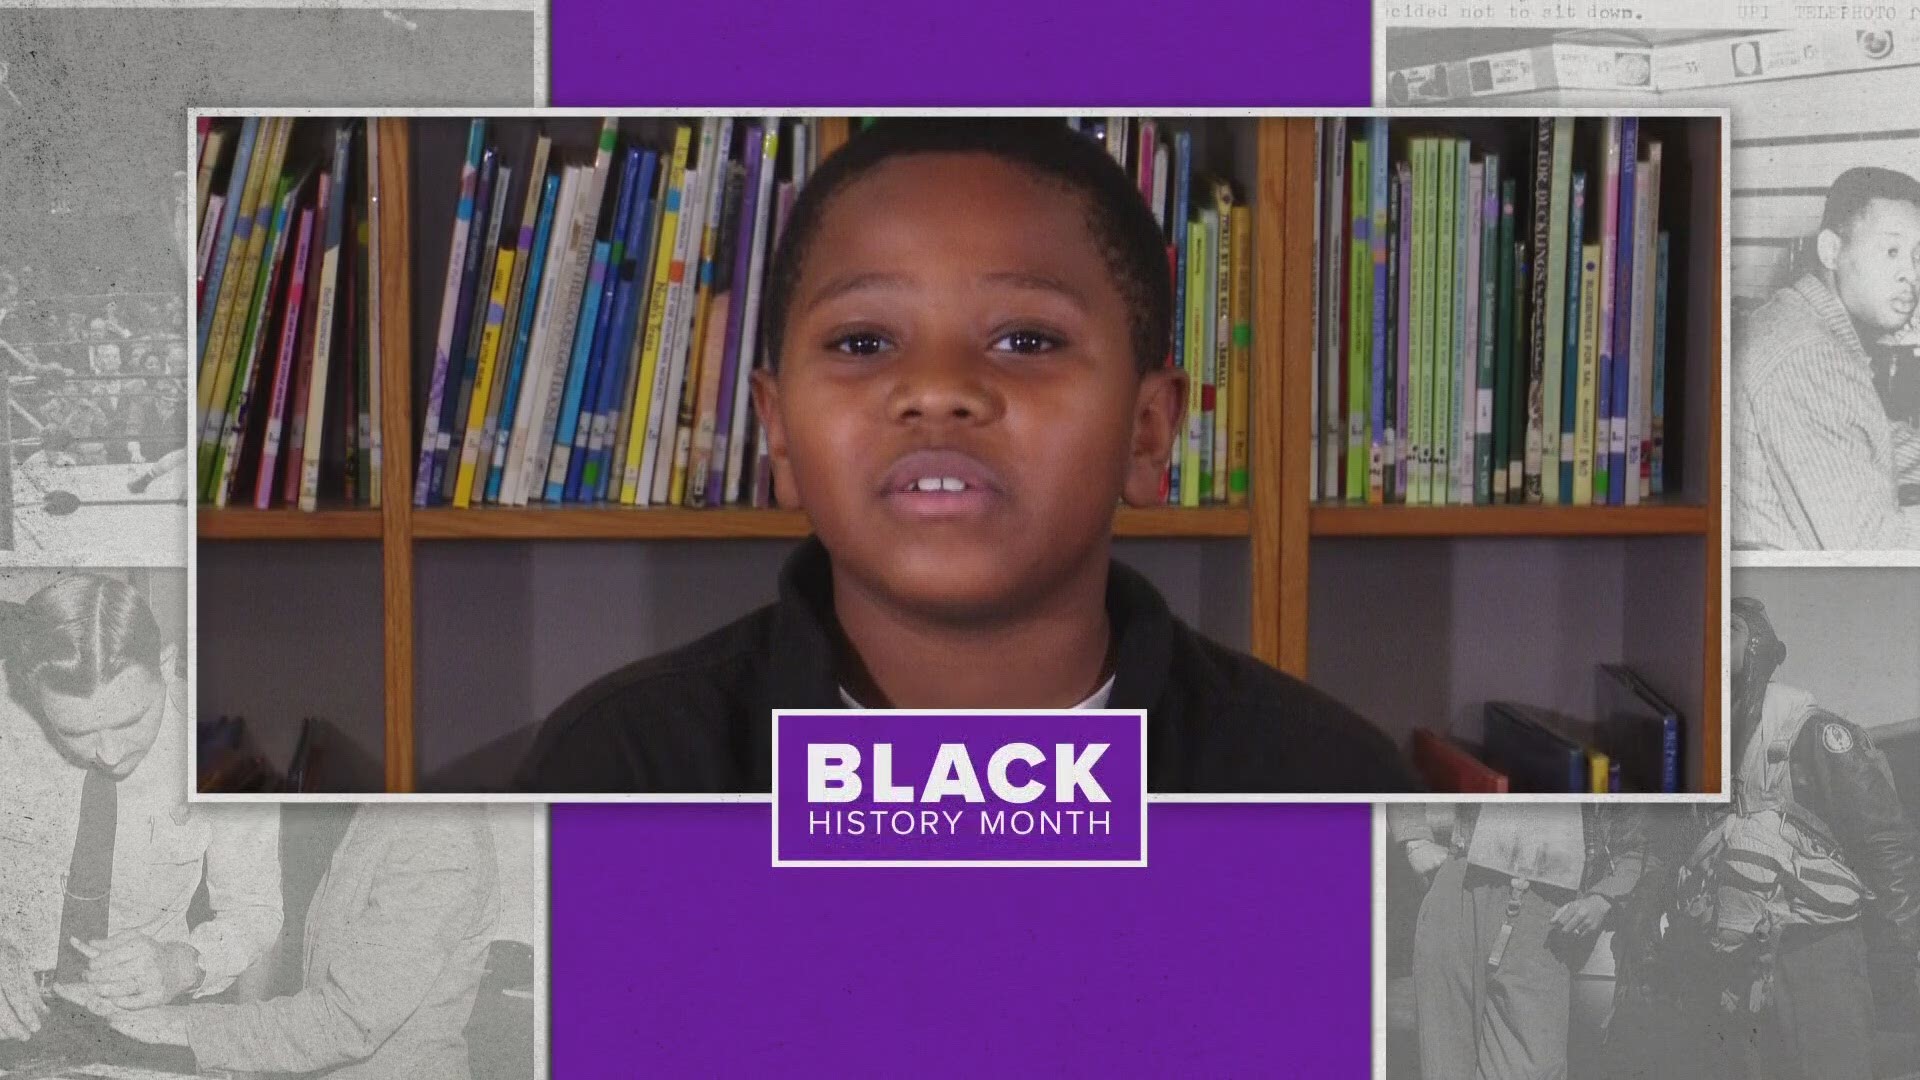 First Coast News is kicking off Black History Month and these cute kids are showing off their knowledge.